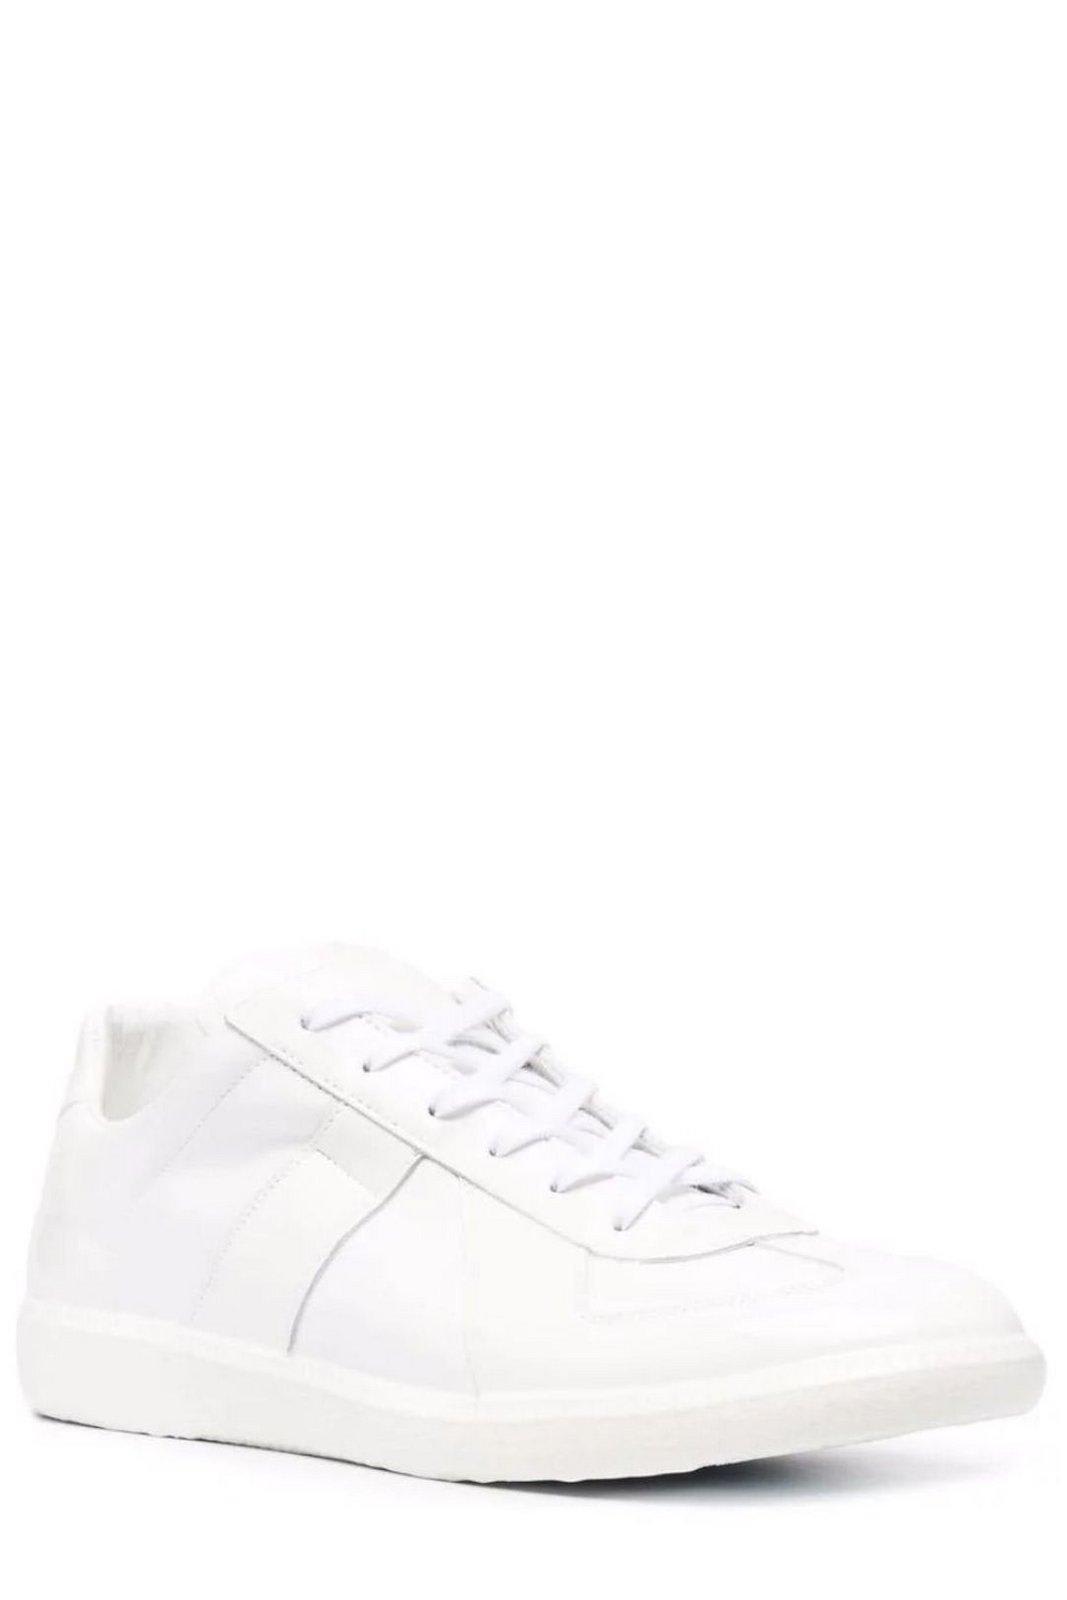 Shop Maison Margiela Replica Lace-up Sneakers In White